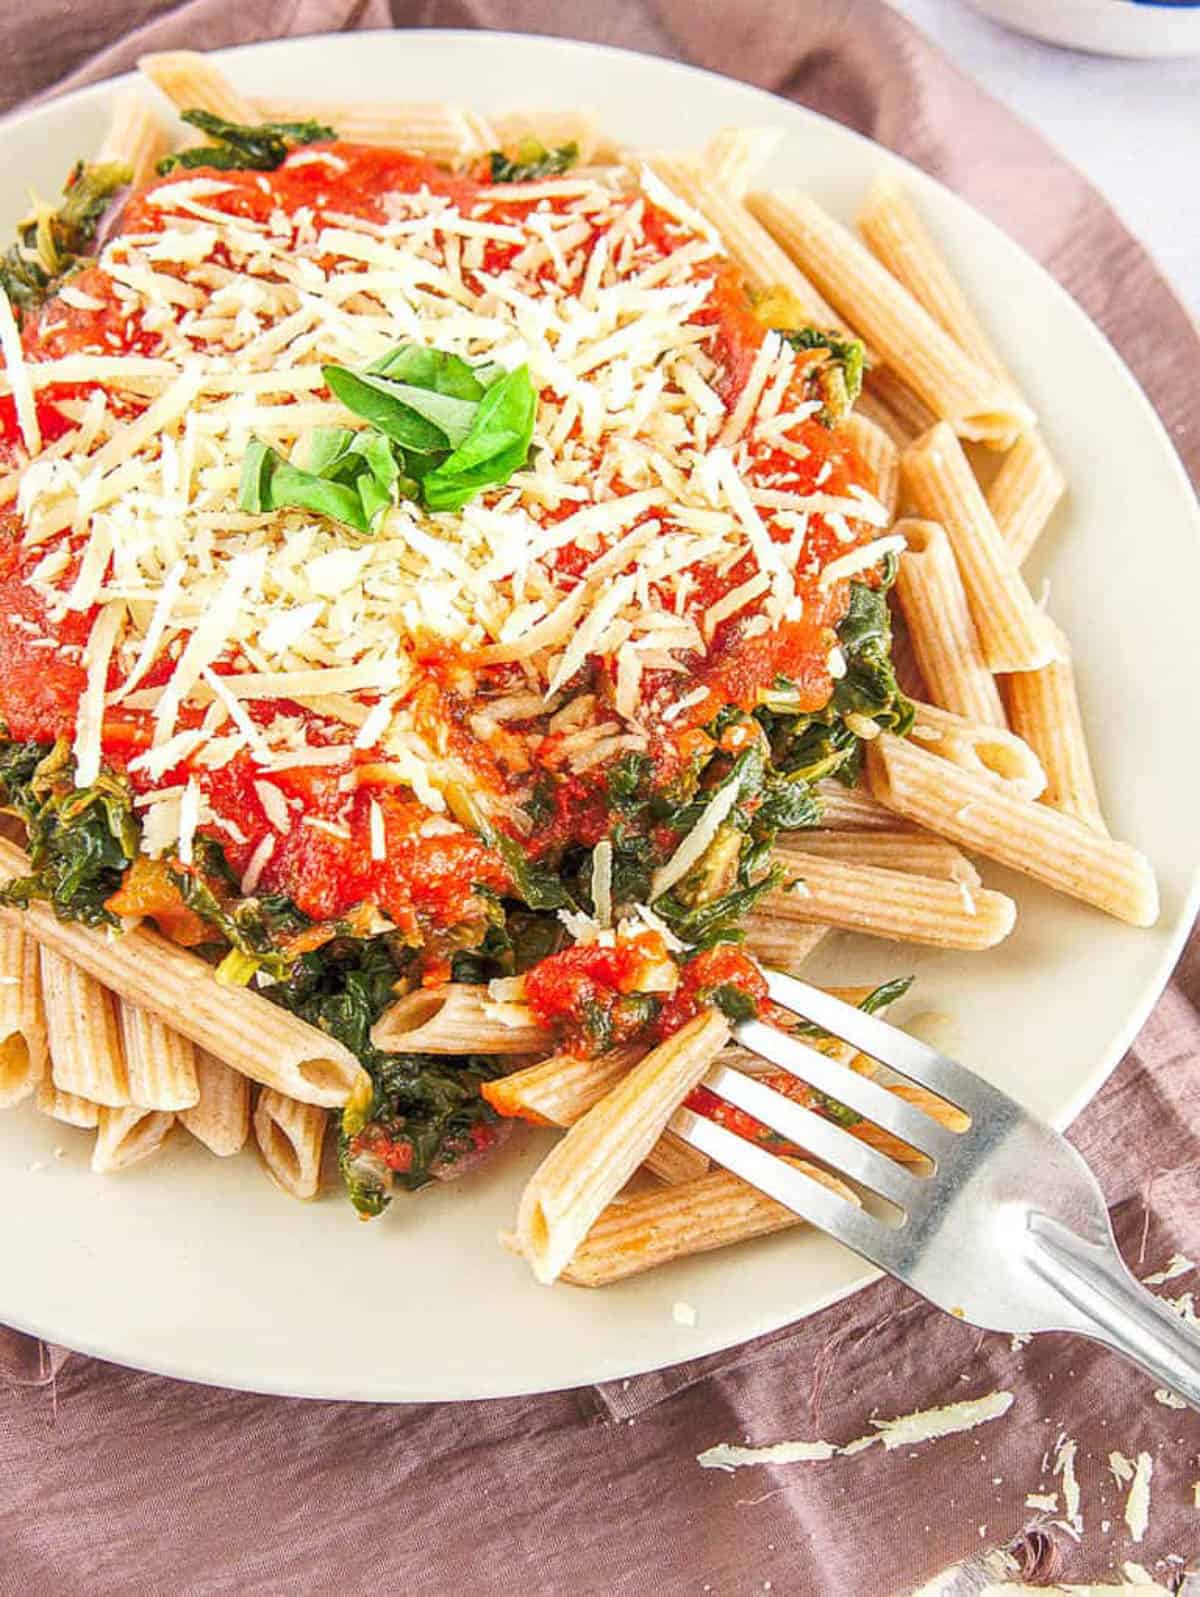 A large white dinner plate of w،le wheat pasta with spinach and red sauce.